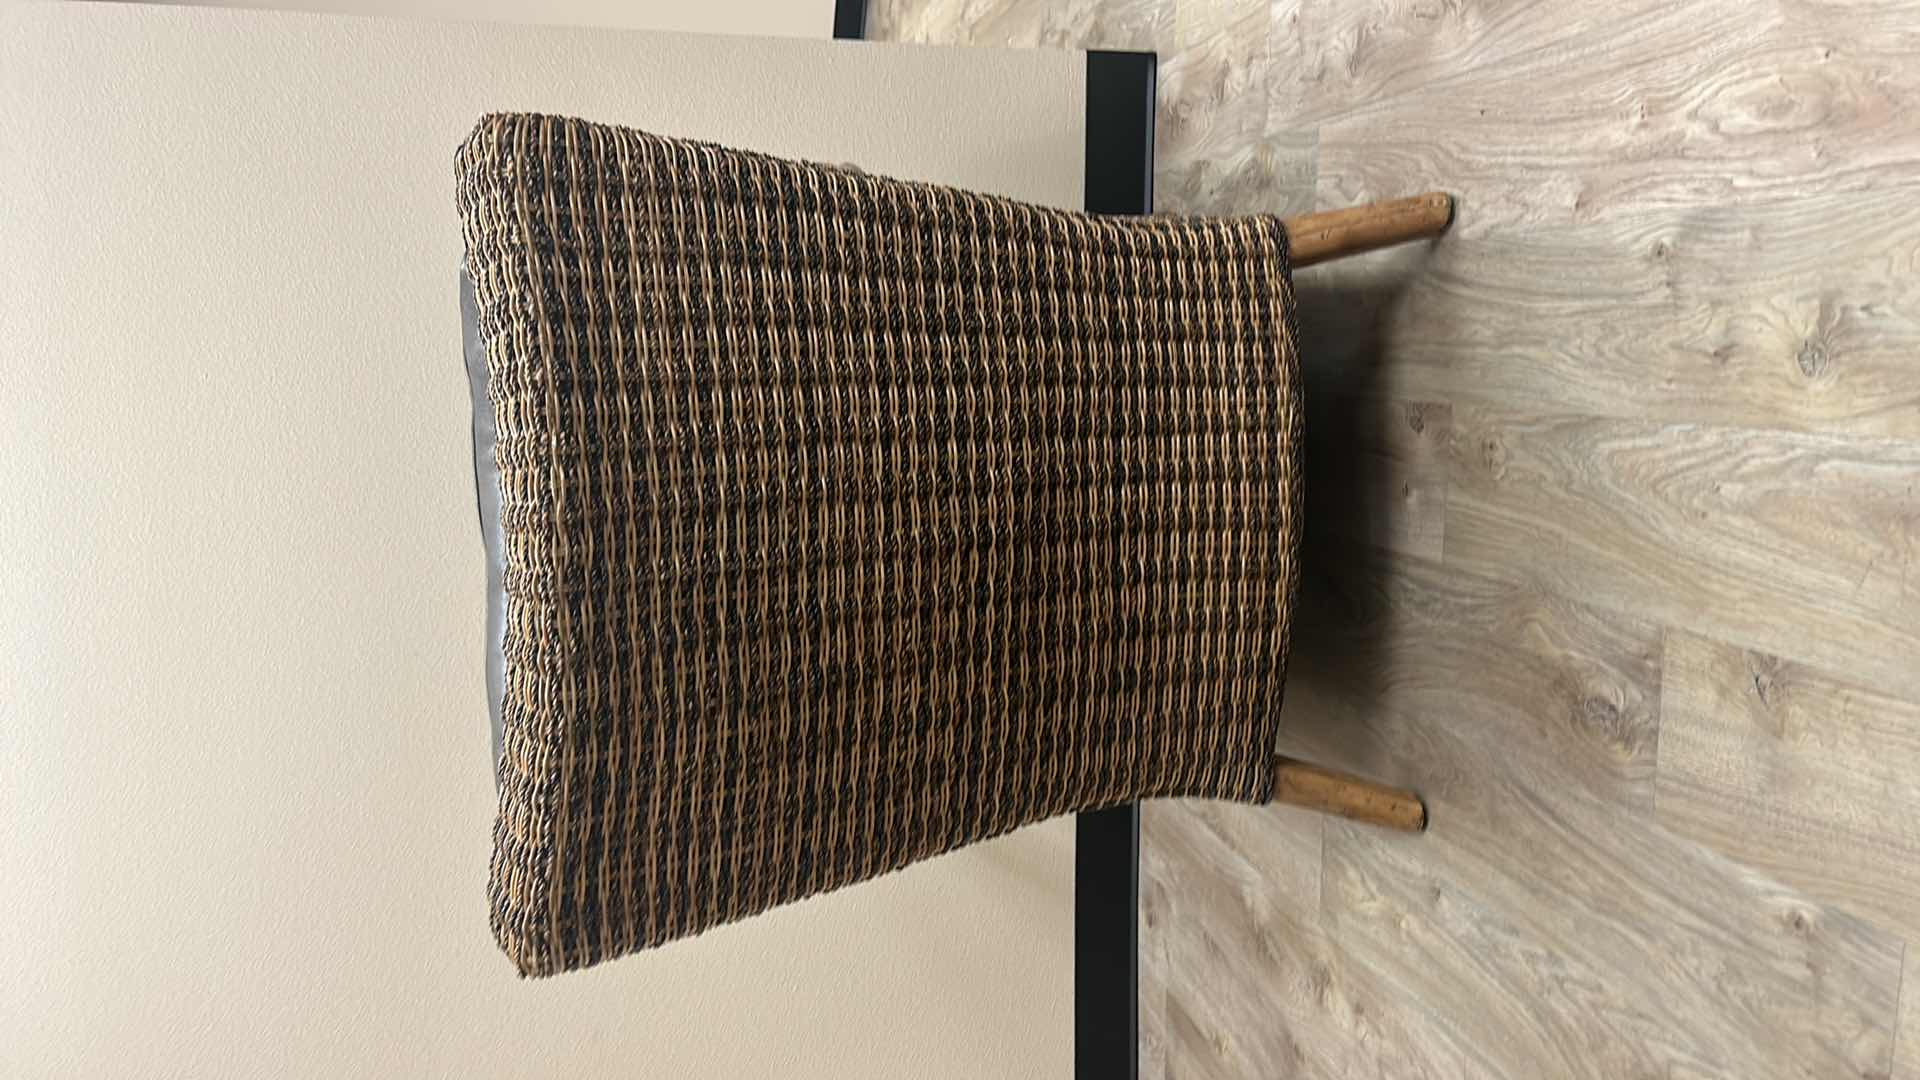 Photo 3 of RATTAN CHAIR WITH LEATHER CUSHIONS BY TOMMY BAHAMA 30” x 32” x H35”